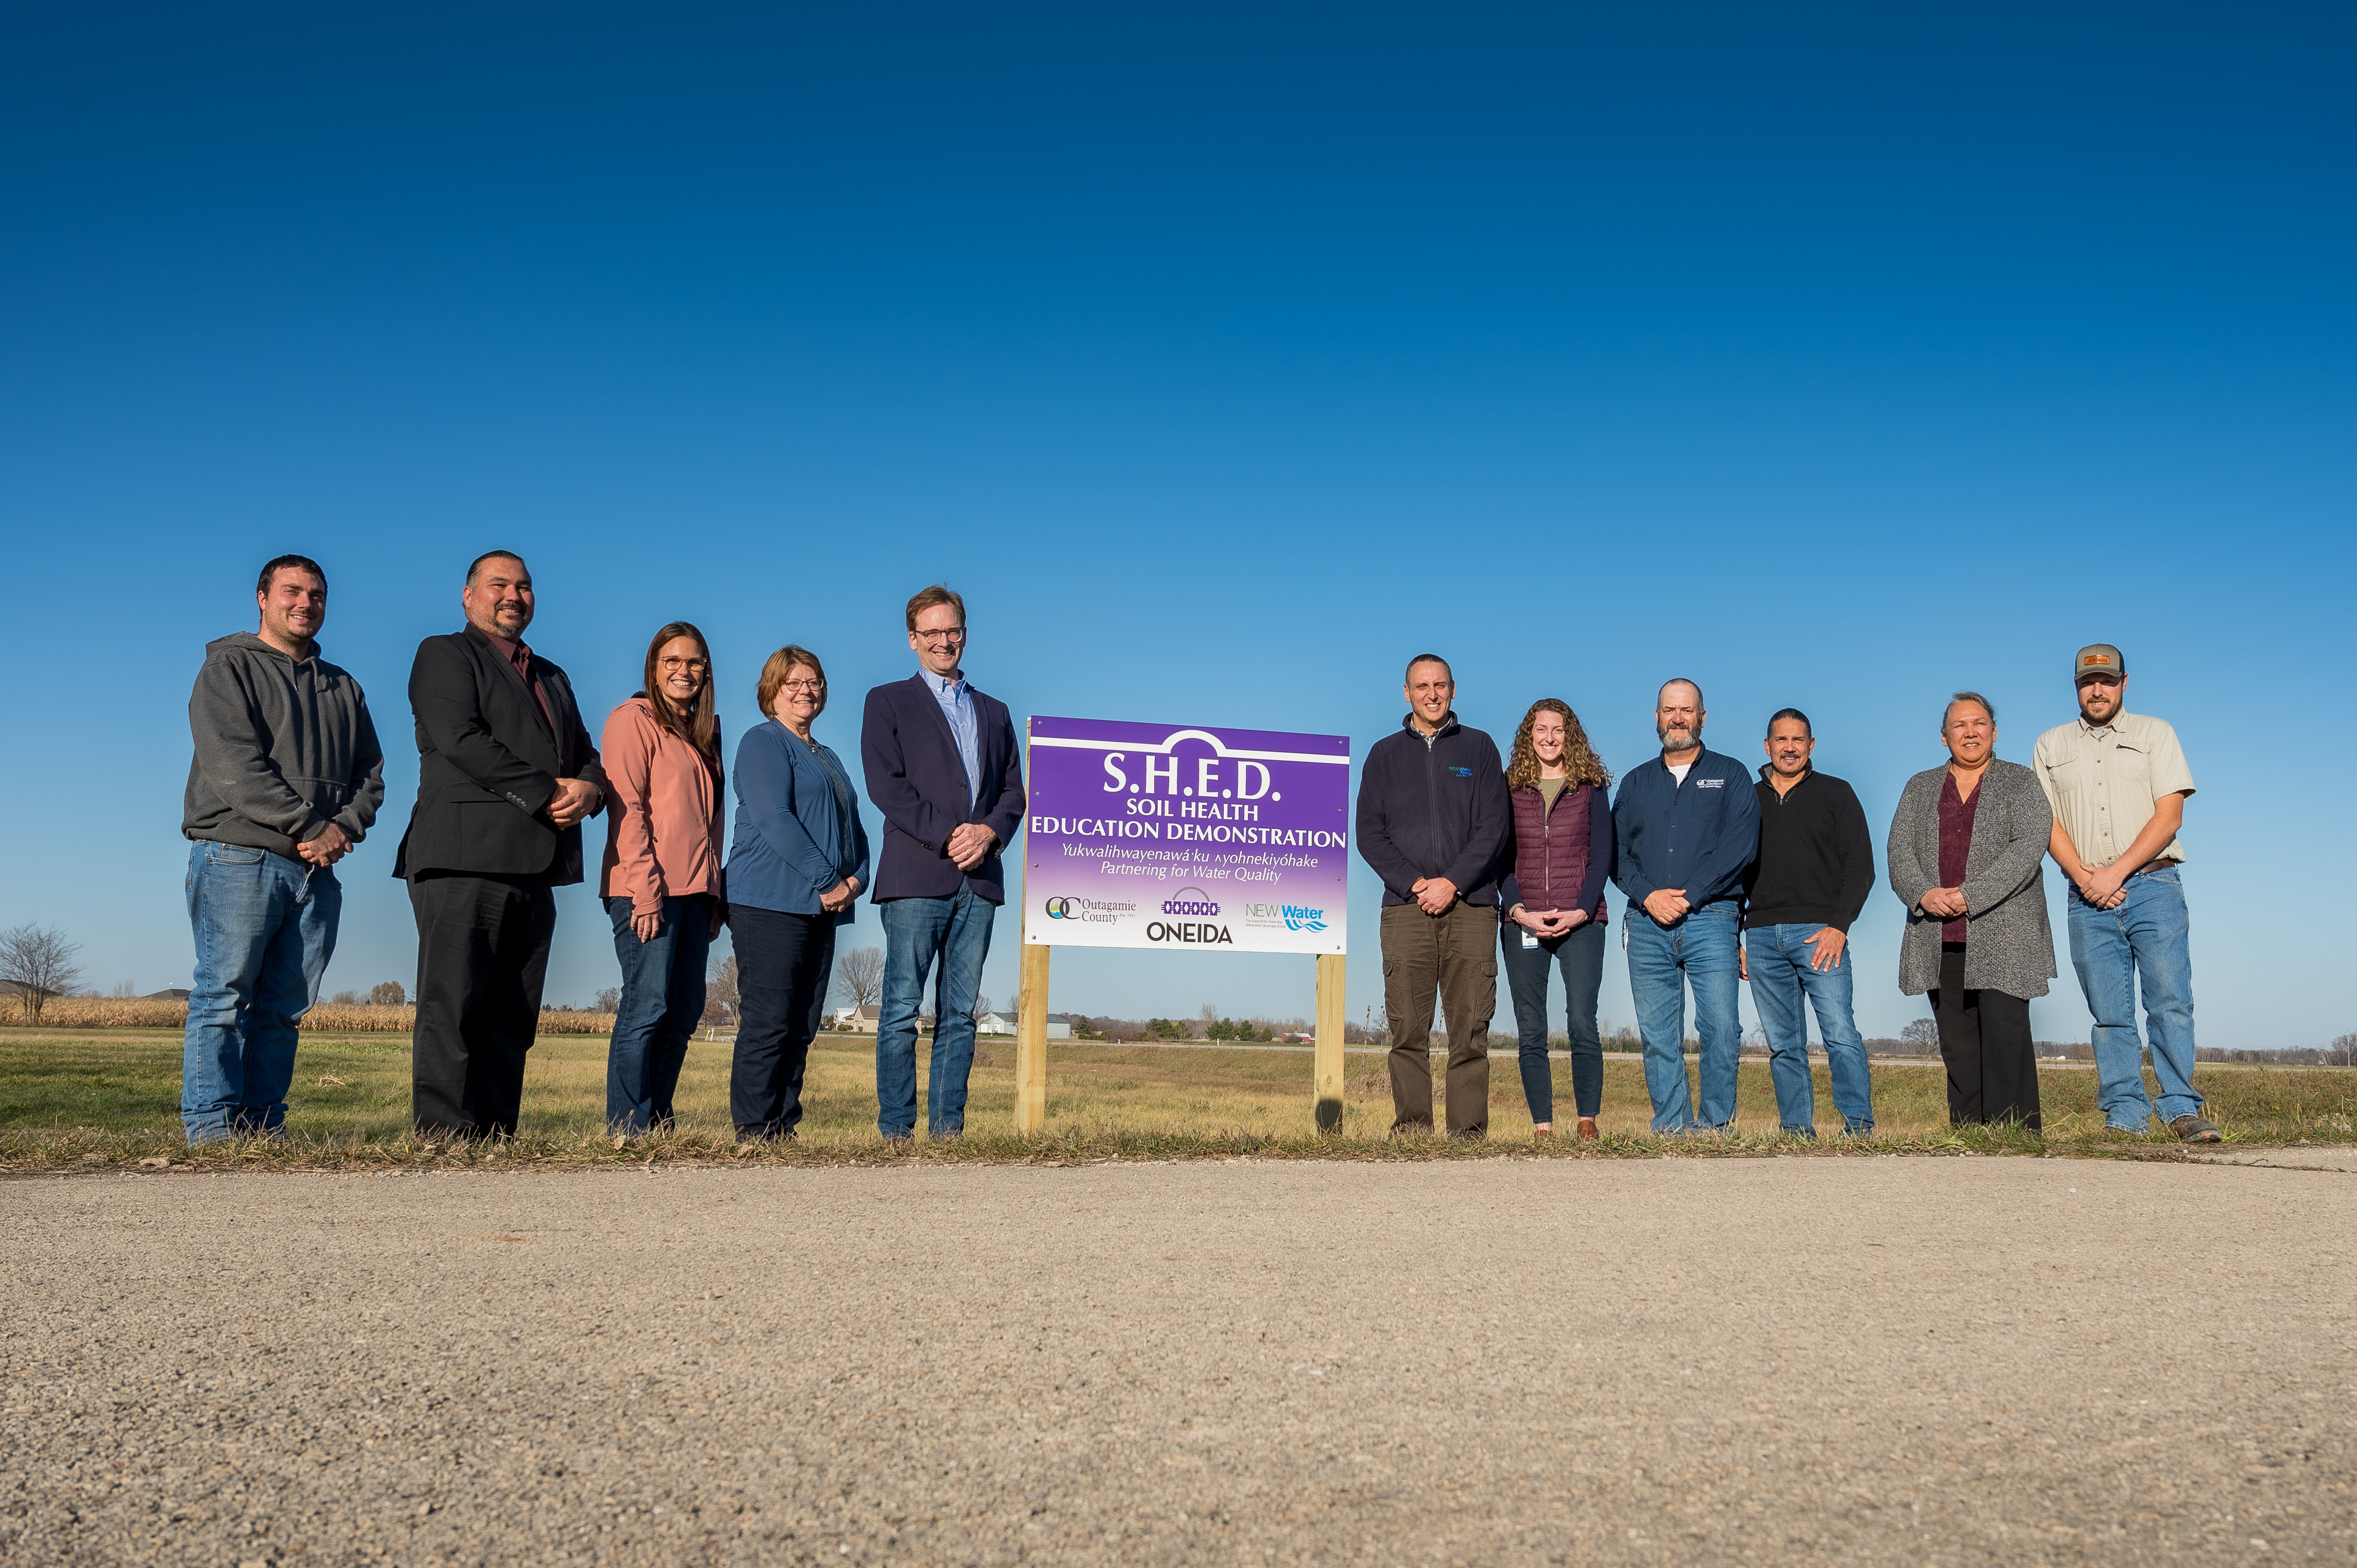 Ribbon Cutting for the Soil Health Education and Demonstration (SHED) facility featuring Oneida Nation, Outagamie County, Fox Wolf Watershed Alliance, and NEW Water. 